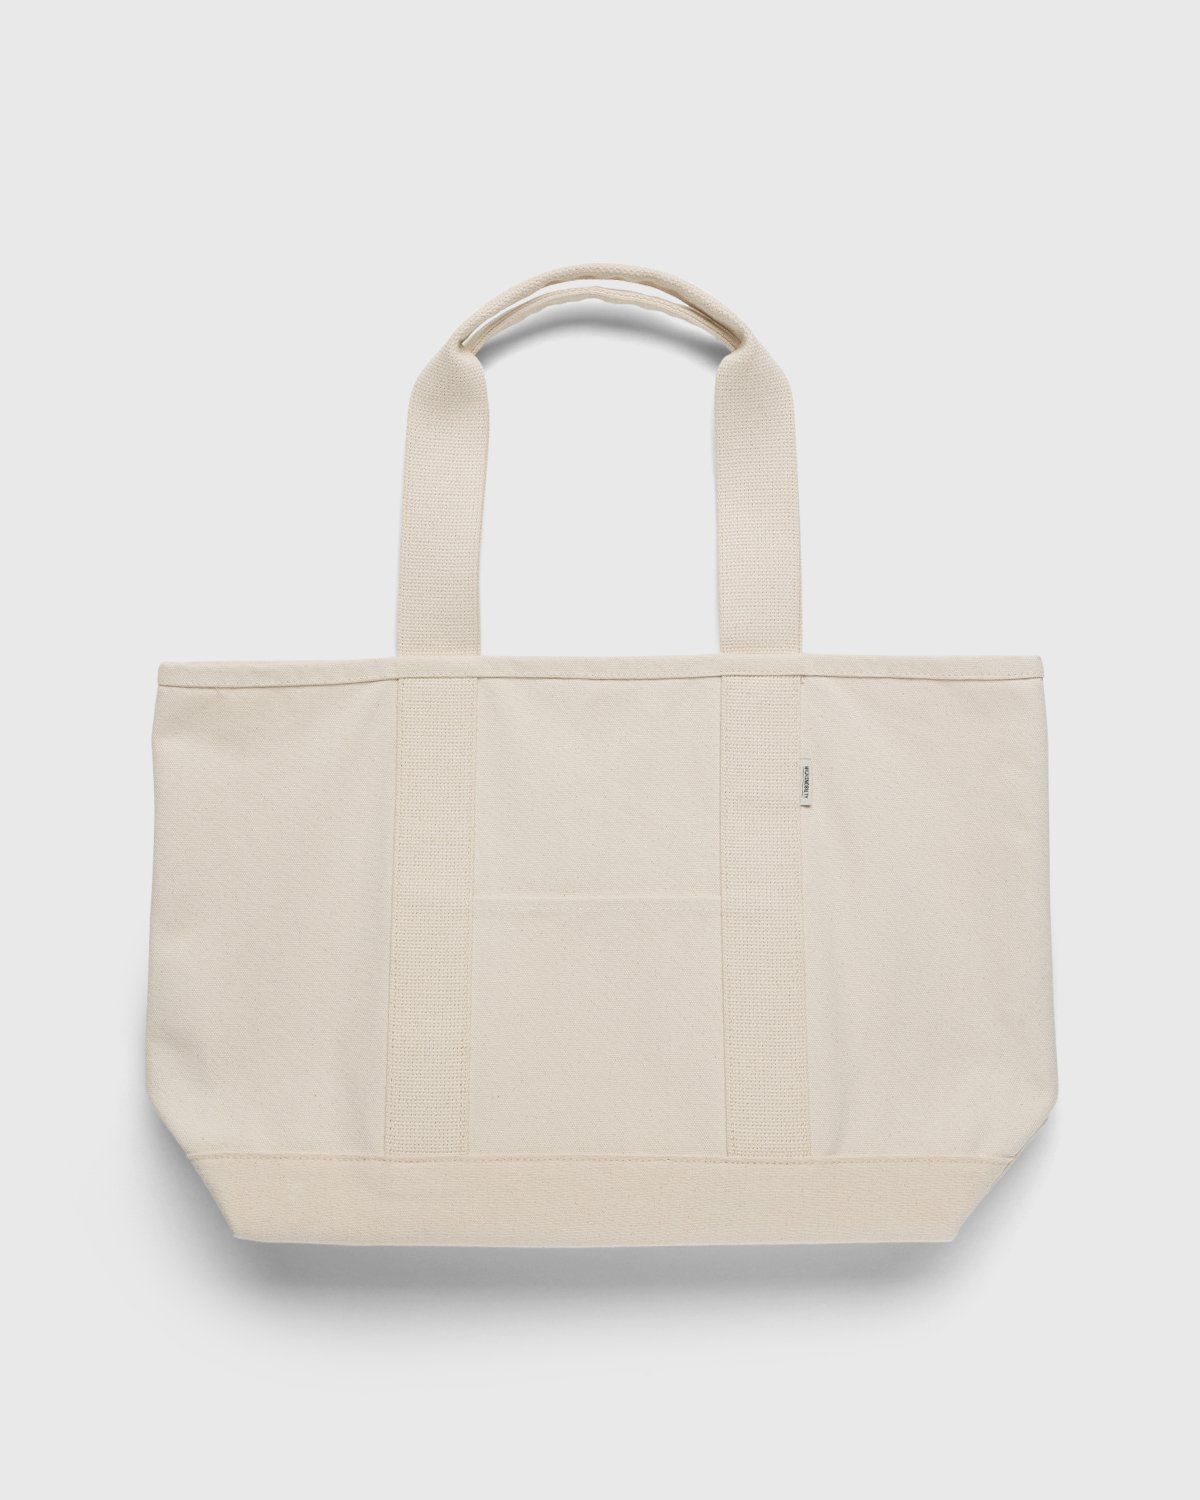 Highsnobiety – Large Canvas "H" Tote Natural - Bags - Beige - Image 2